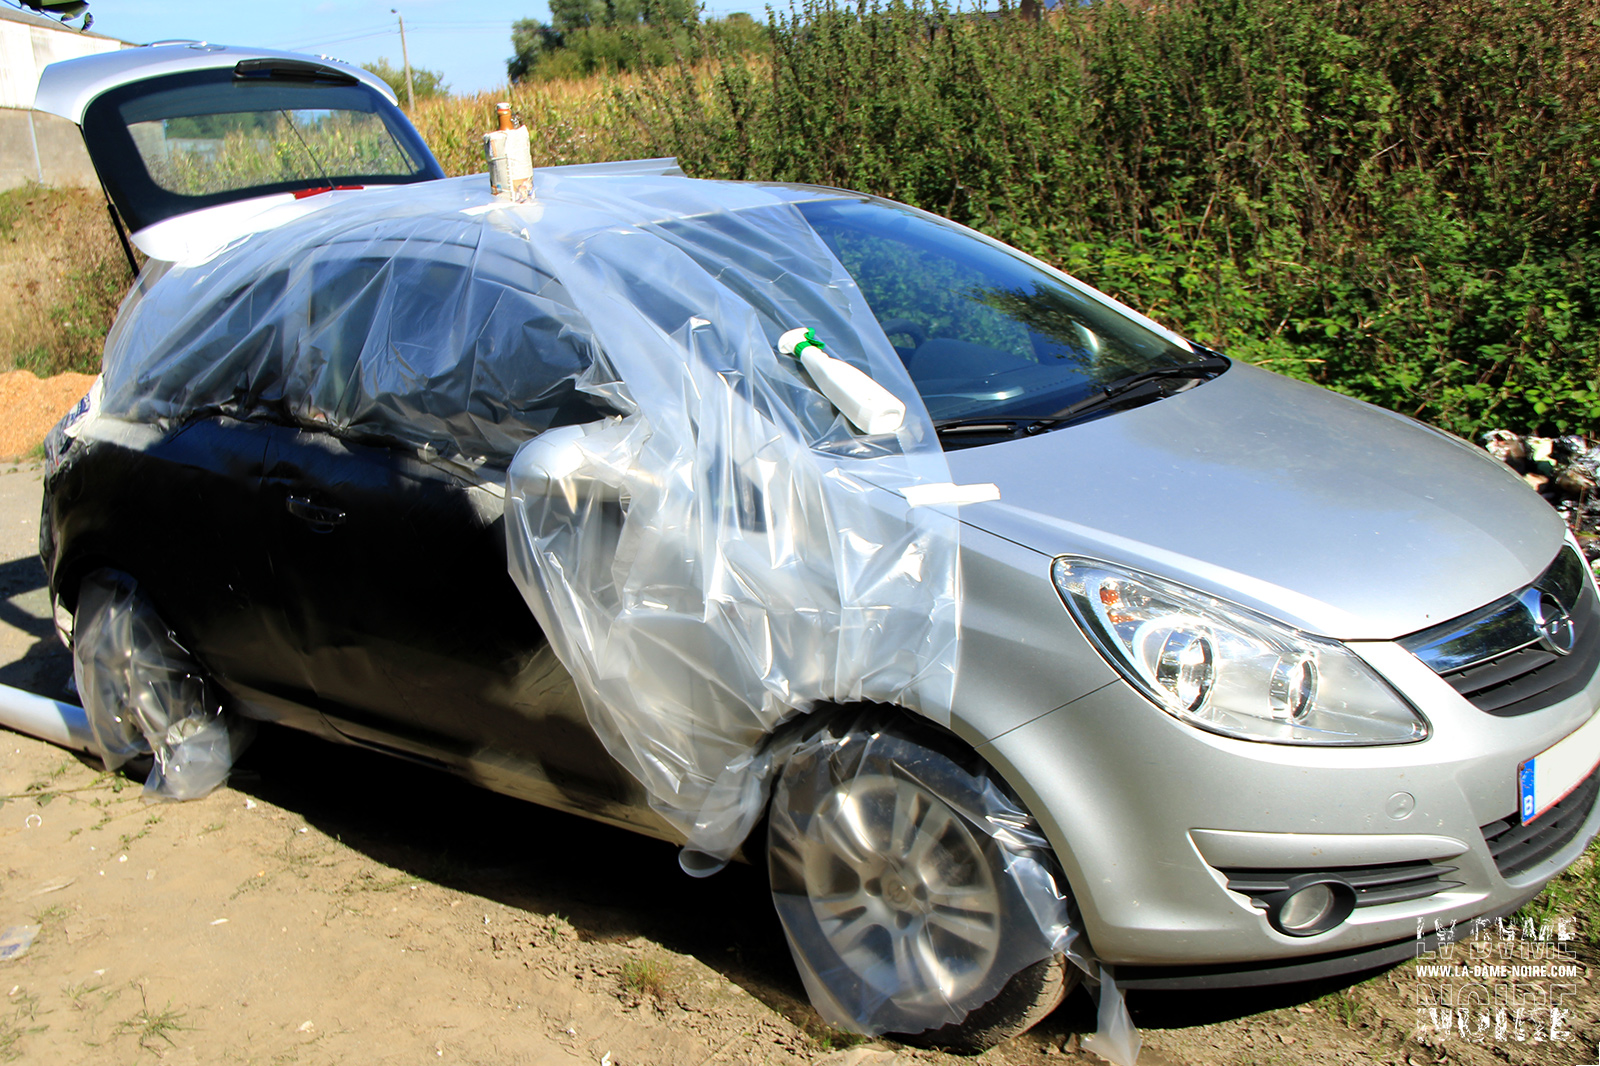 Right side of the opel corsa with paint